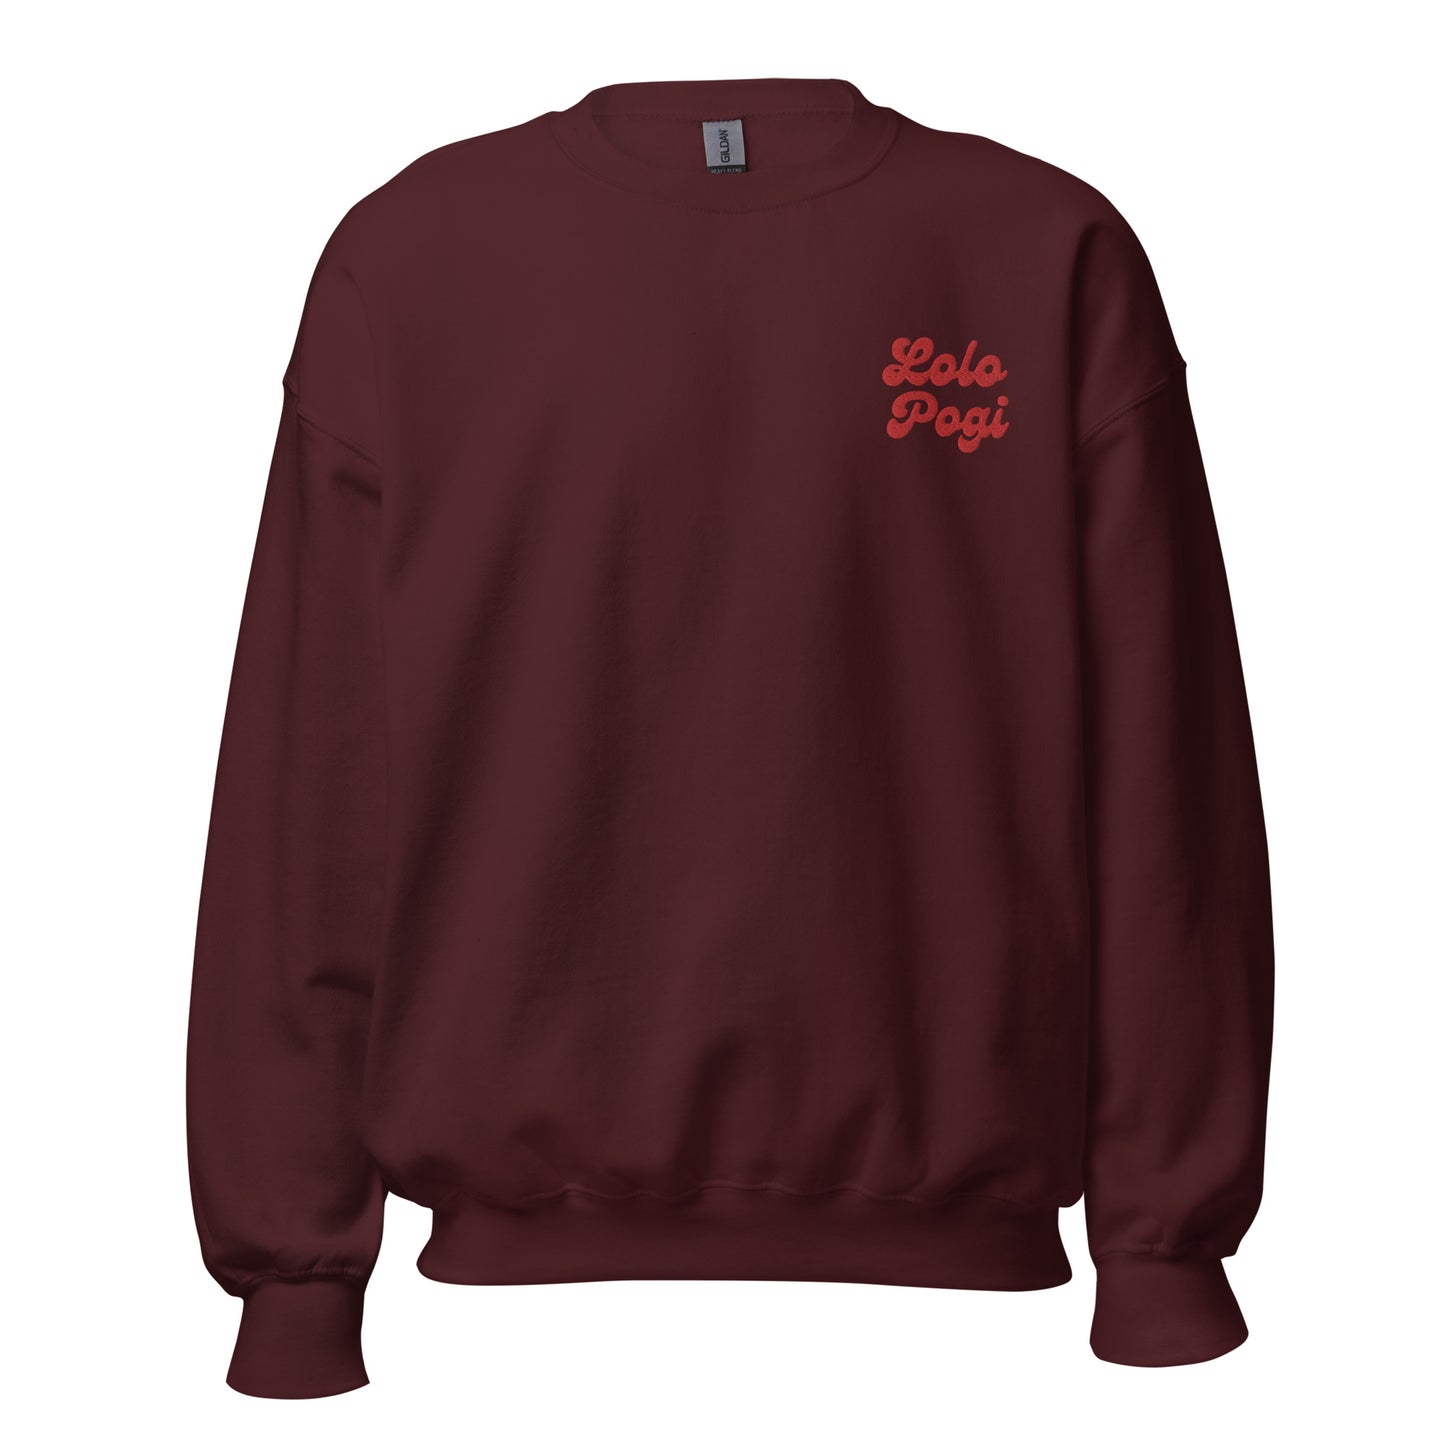 Filipino Sweatshirt Crew Neck Lolo Pogi Grandfather Embroidered Father's Day Gift in color variant Maroon